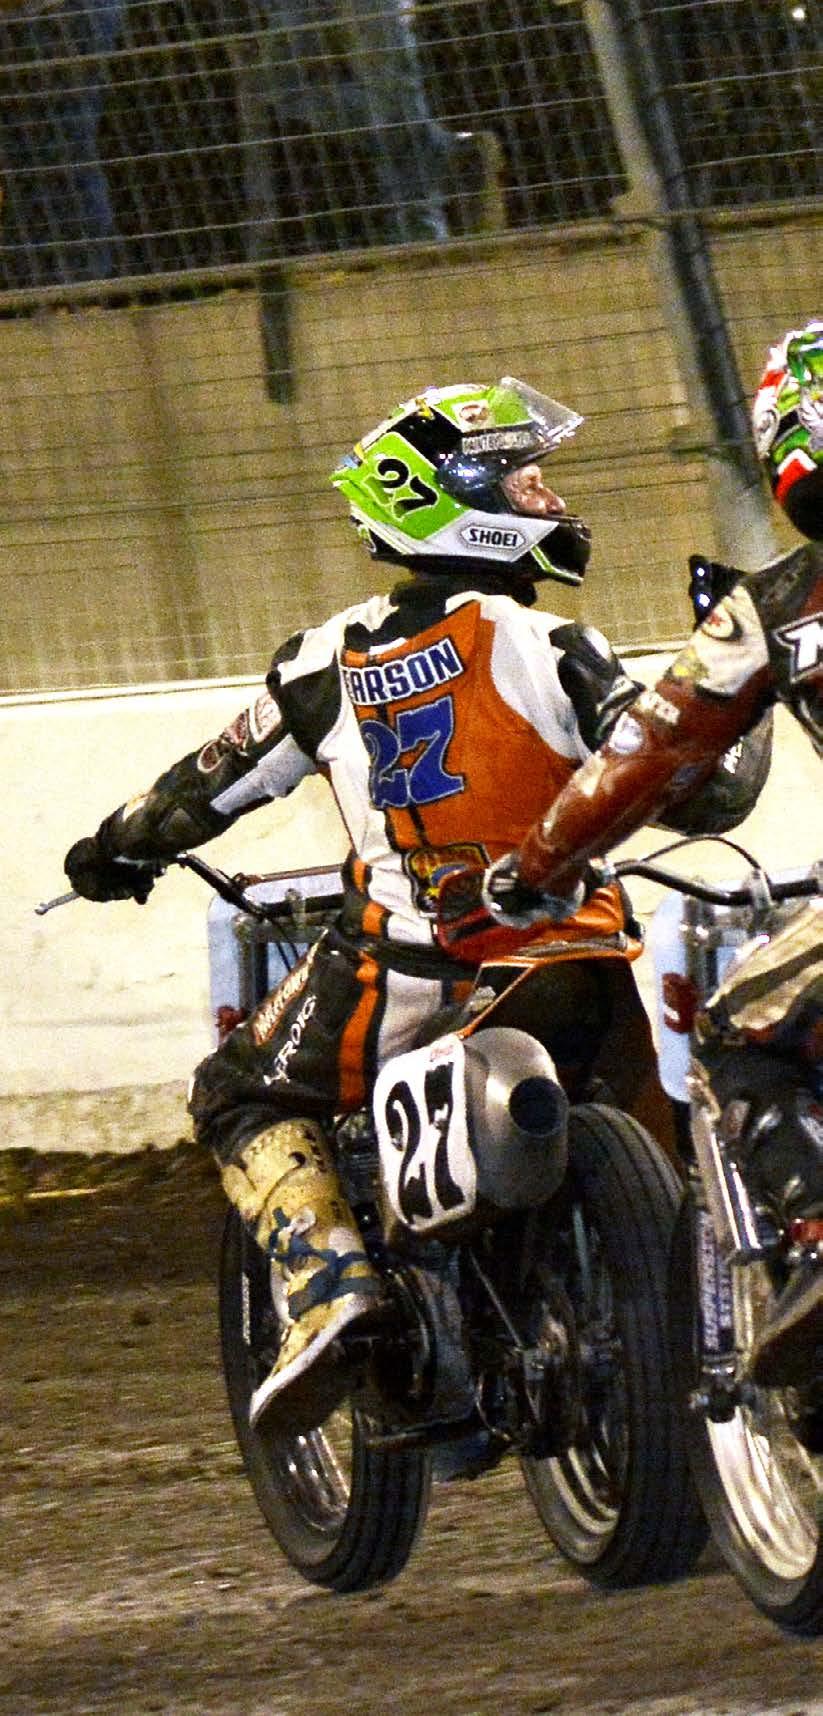 ROUND 17 / SEPTEMBER 23, 2017 TEXAS MOTOR SPEEDWAY / FORT WORTH, TEXAS FLAT TRACK 2017 AMERICAN FLAT TRACK CHAMPIONSHIP P64 CARVER S TEXAS BBQ JEFFREY CARVER GETS MAIDEN TWINS WIN STORY AND